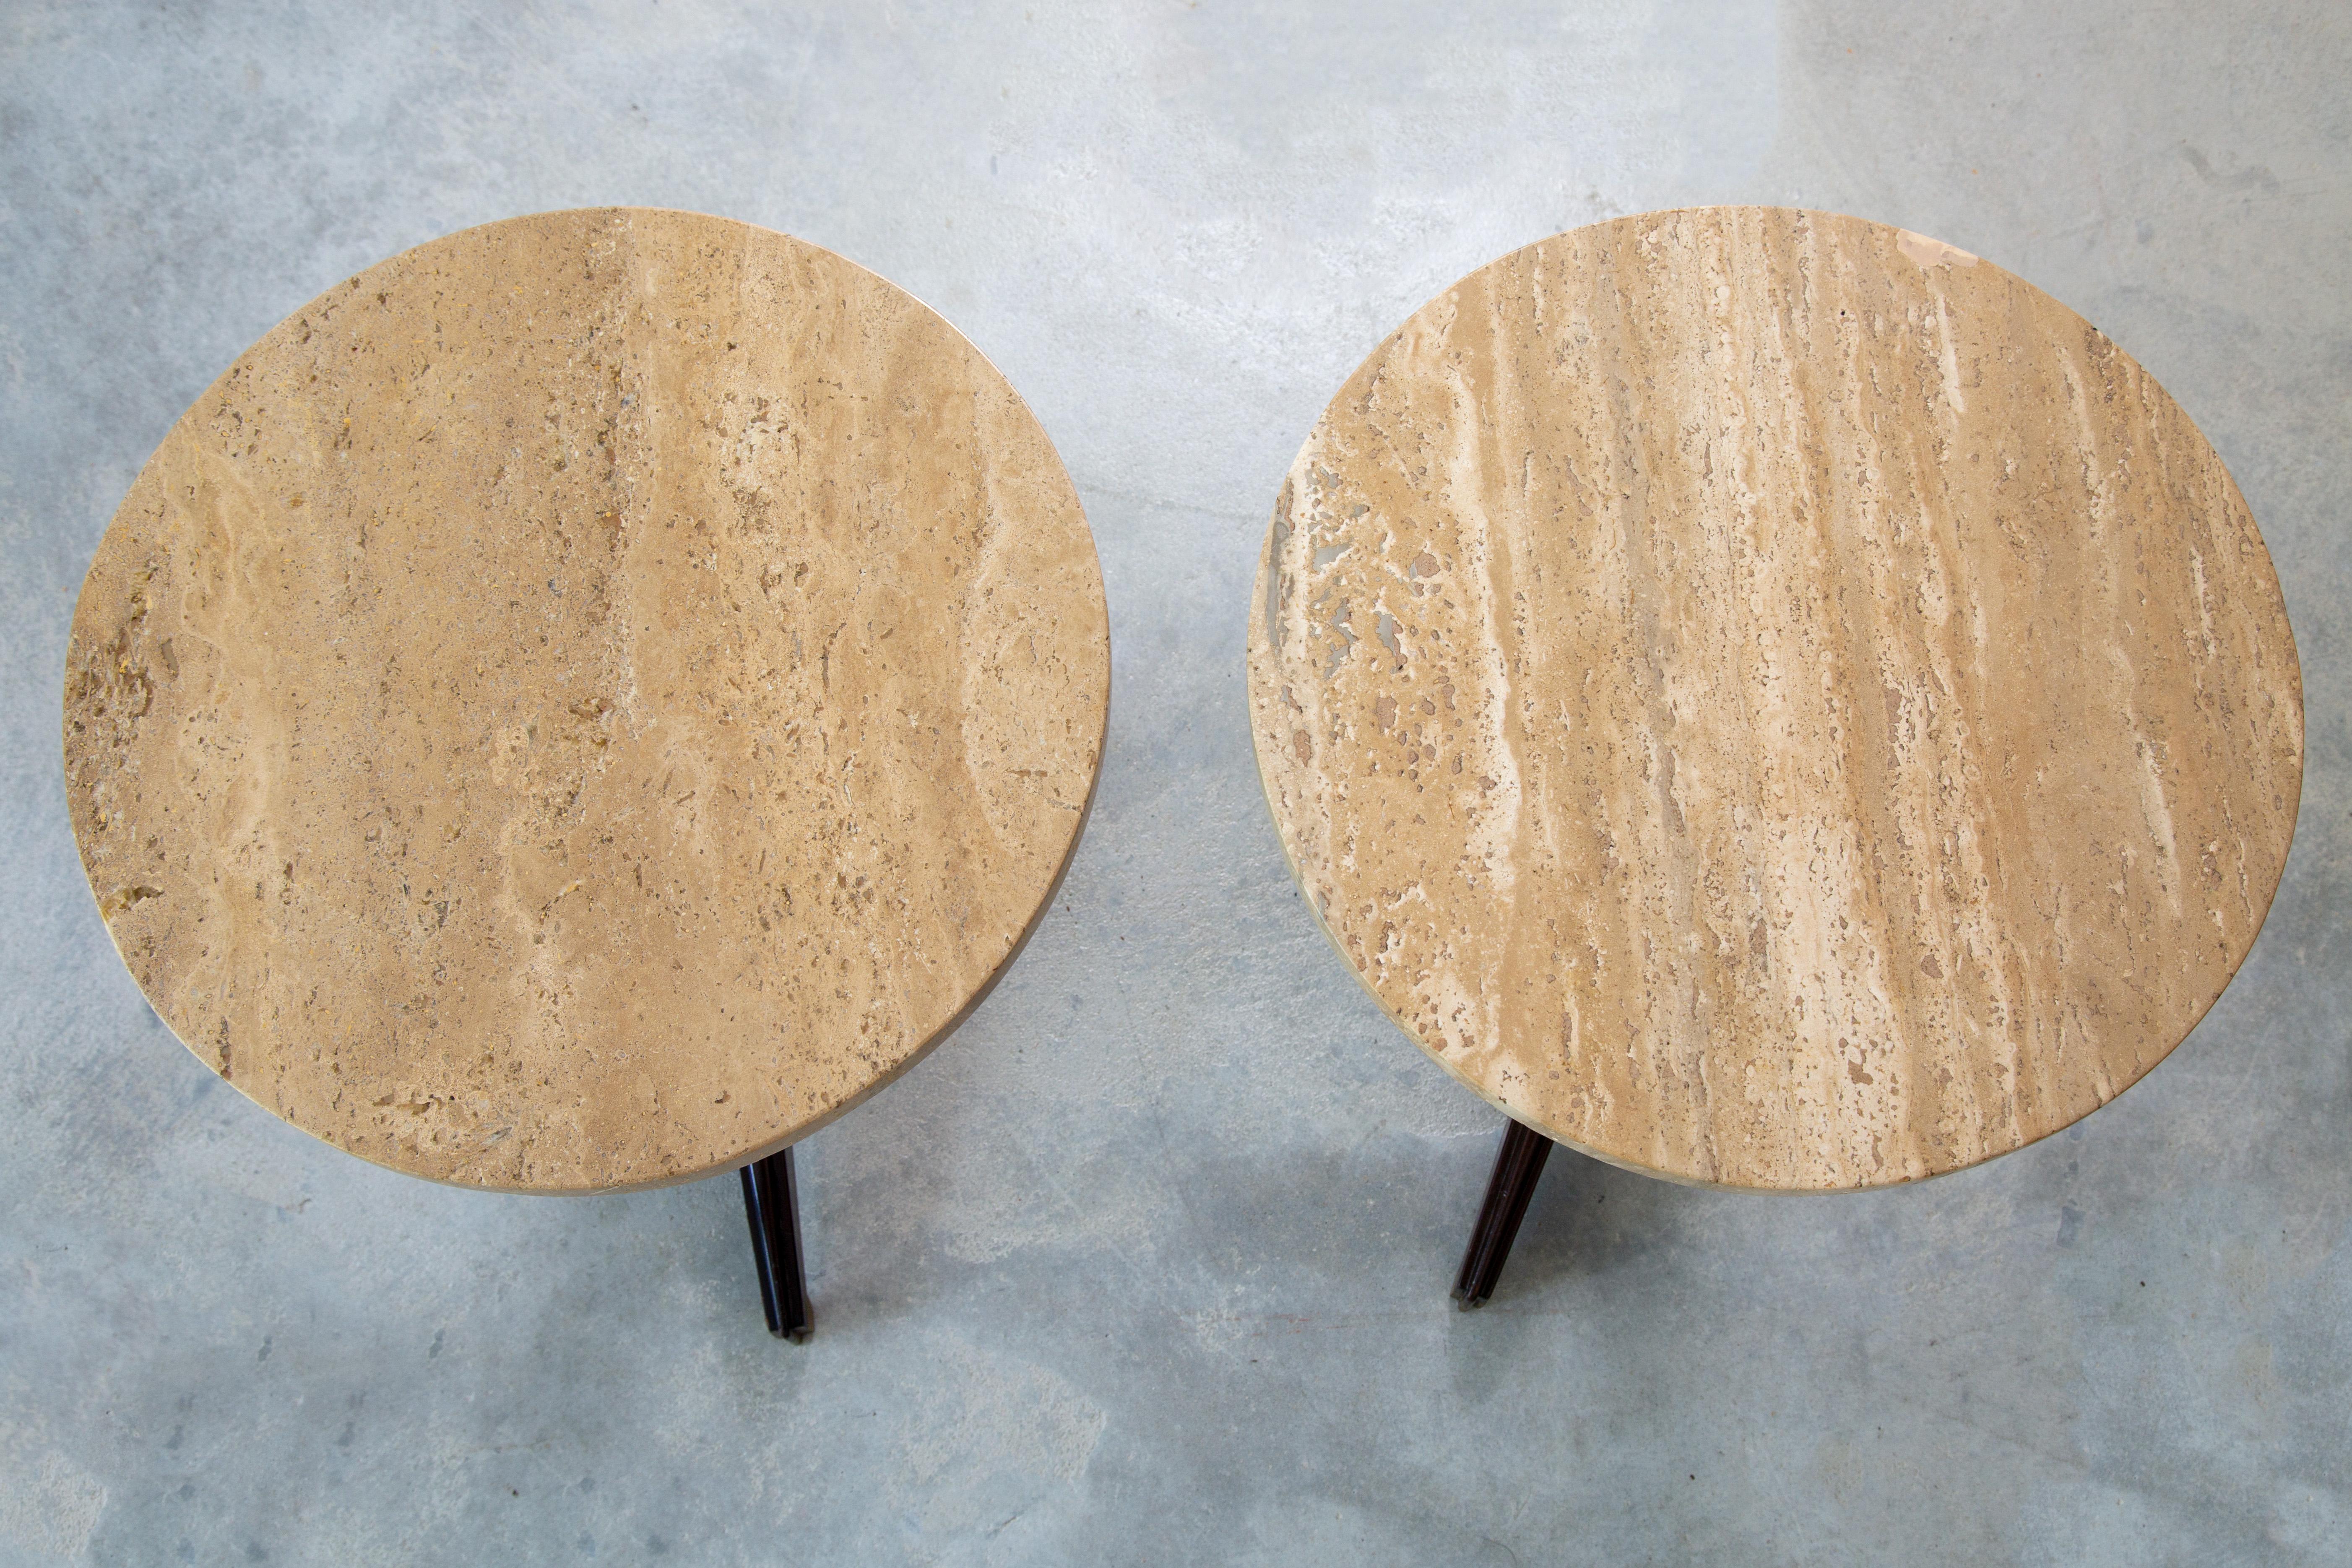 Pair of Edward Wormley for Dunbar travertine and brass pedestal side tables  For Sale 6